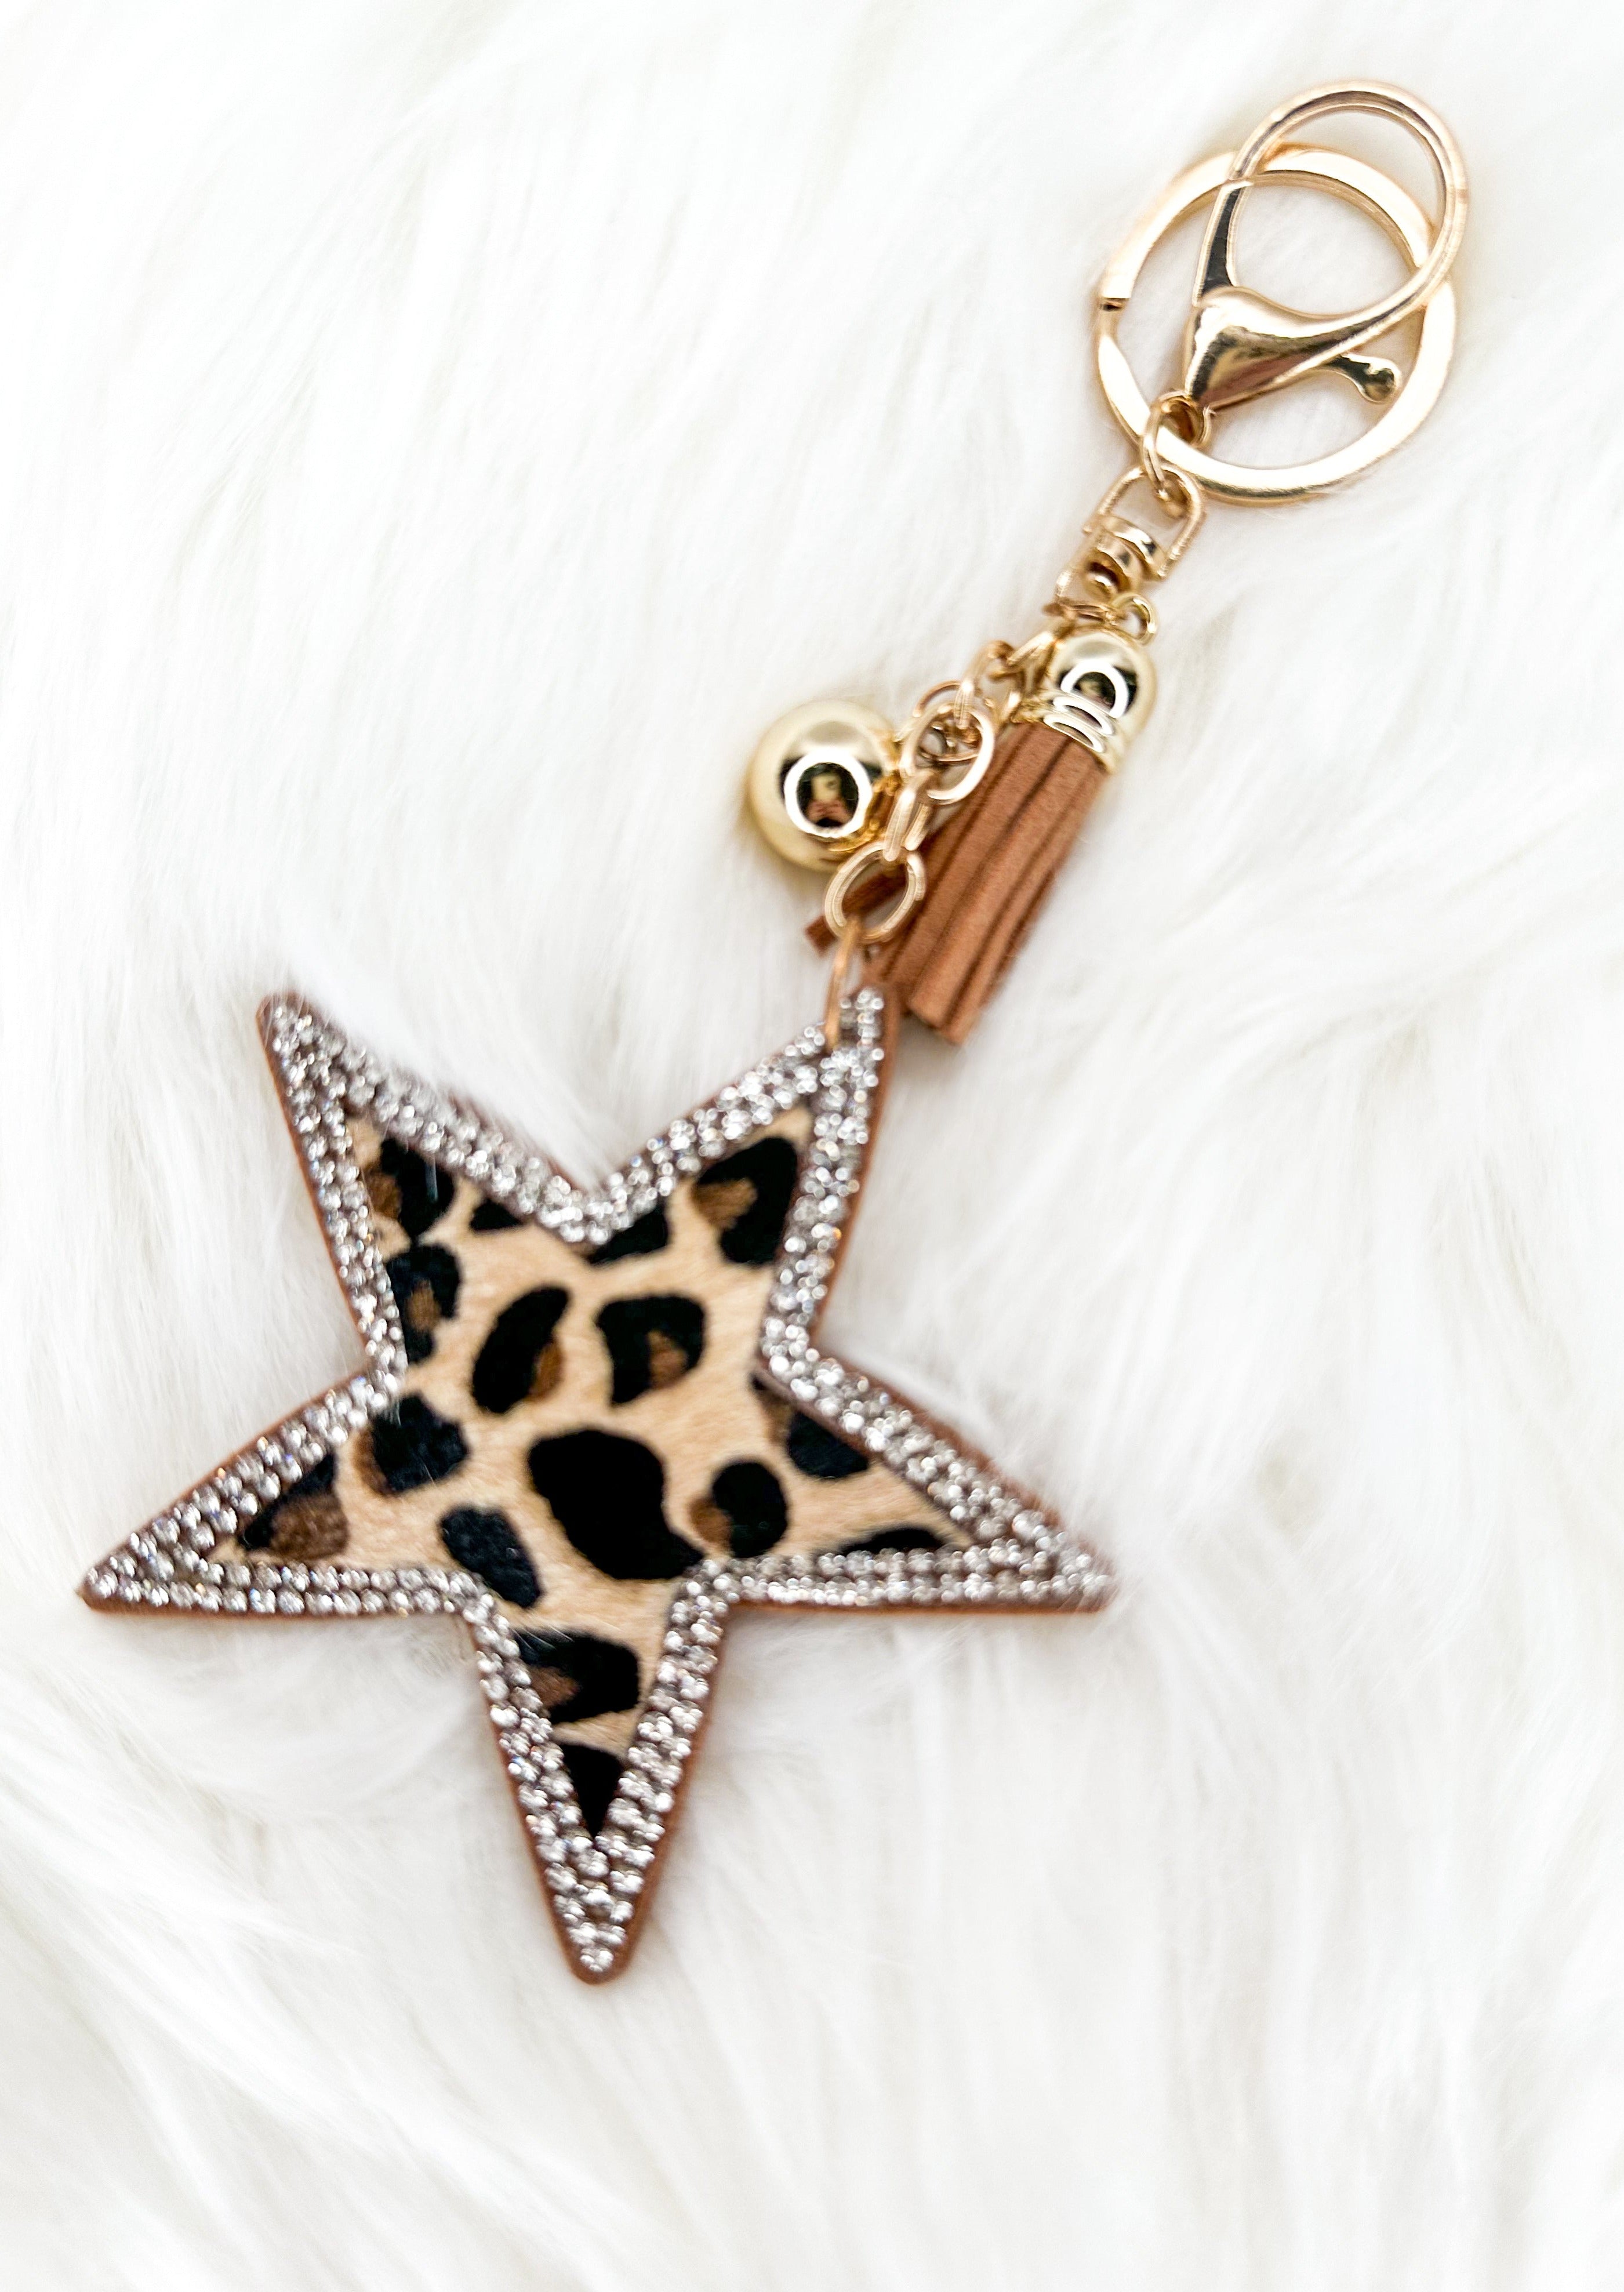 Leopard star keychain trimmed in silver sparkles with gold tassel and hardware.